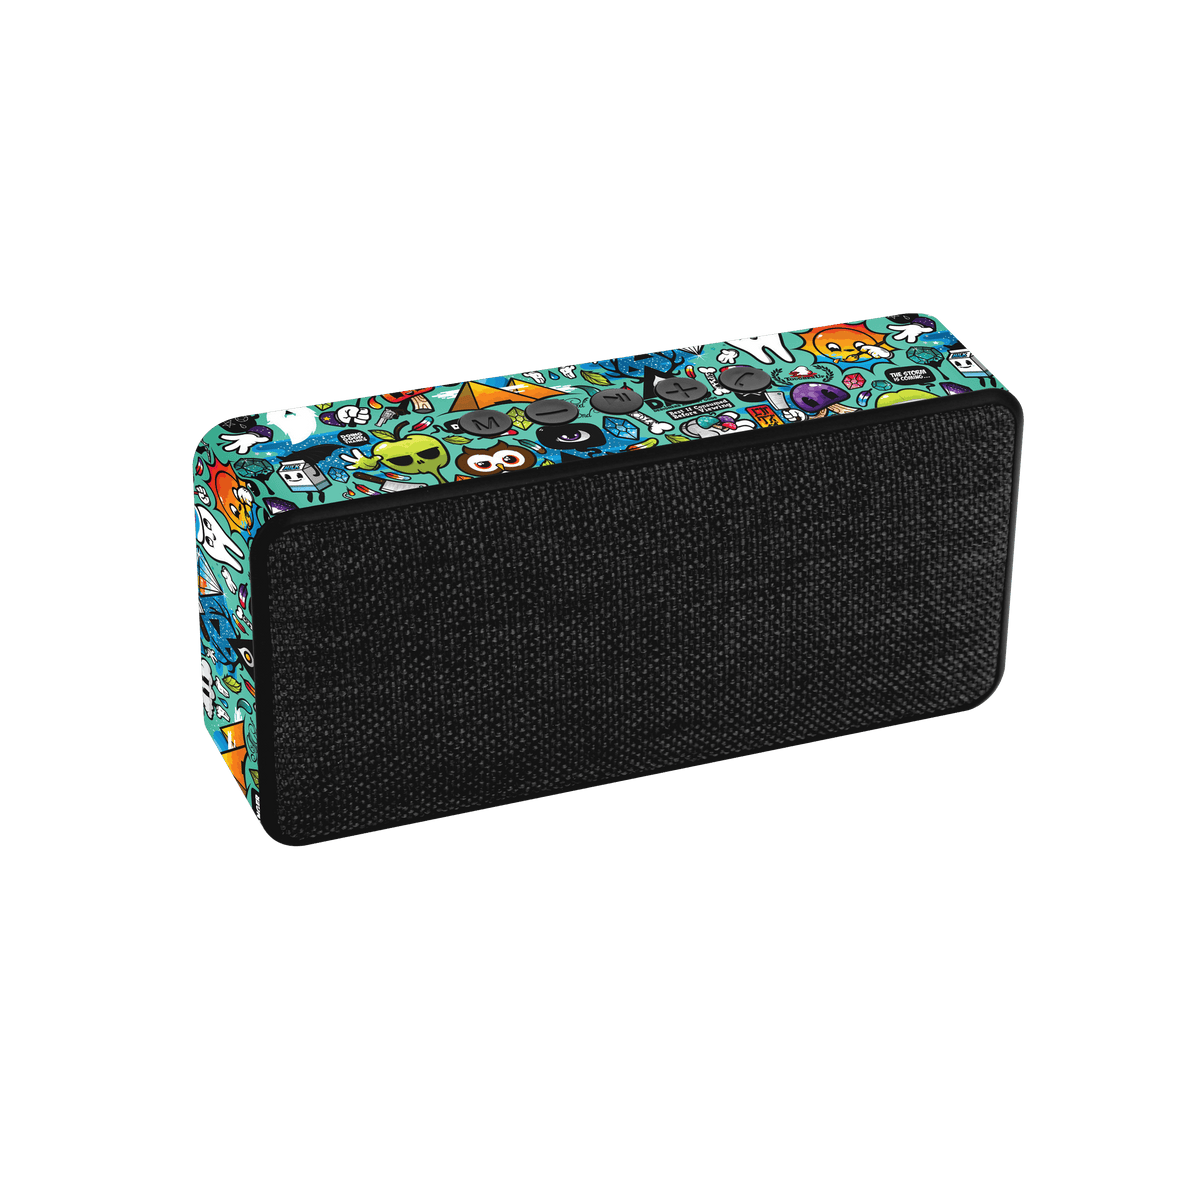 Foxin x Wrapcart Brick Bluetooth Speaker - 10W Crystal Clear Audio, Upto 6 Hours Playback, 180 Days Warranty, Abstract Fabric Finish